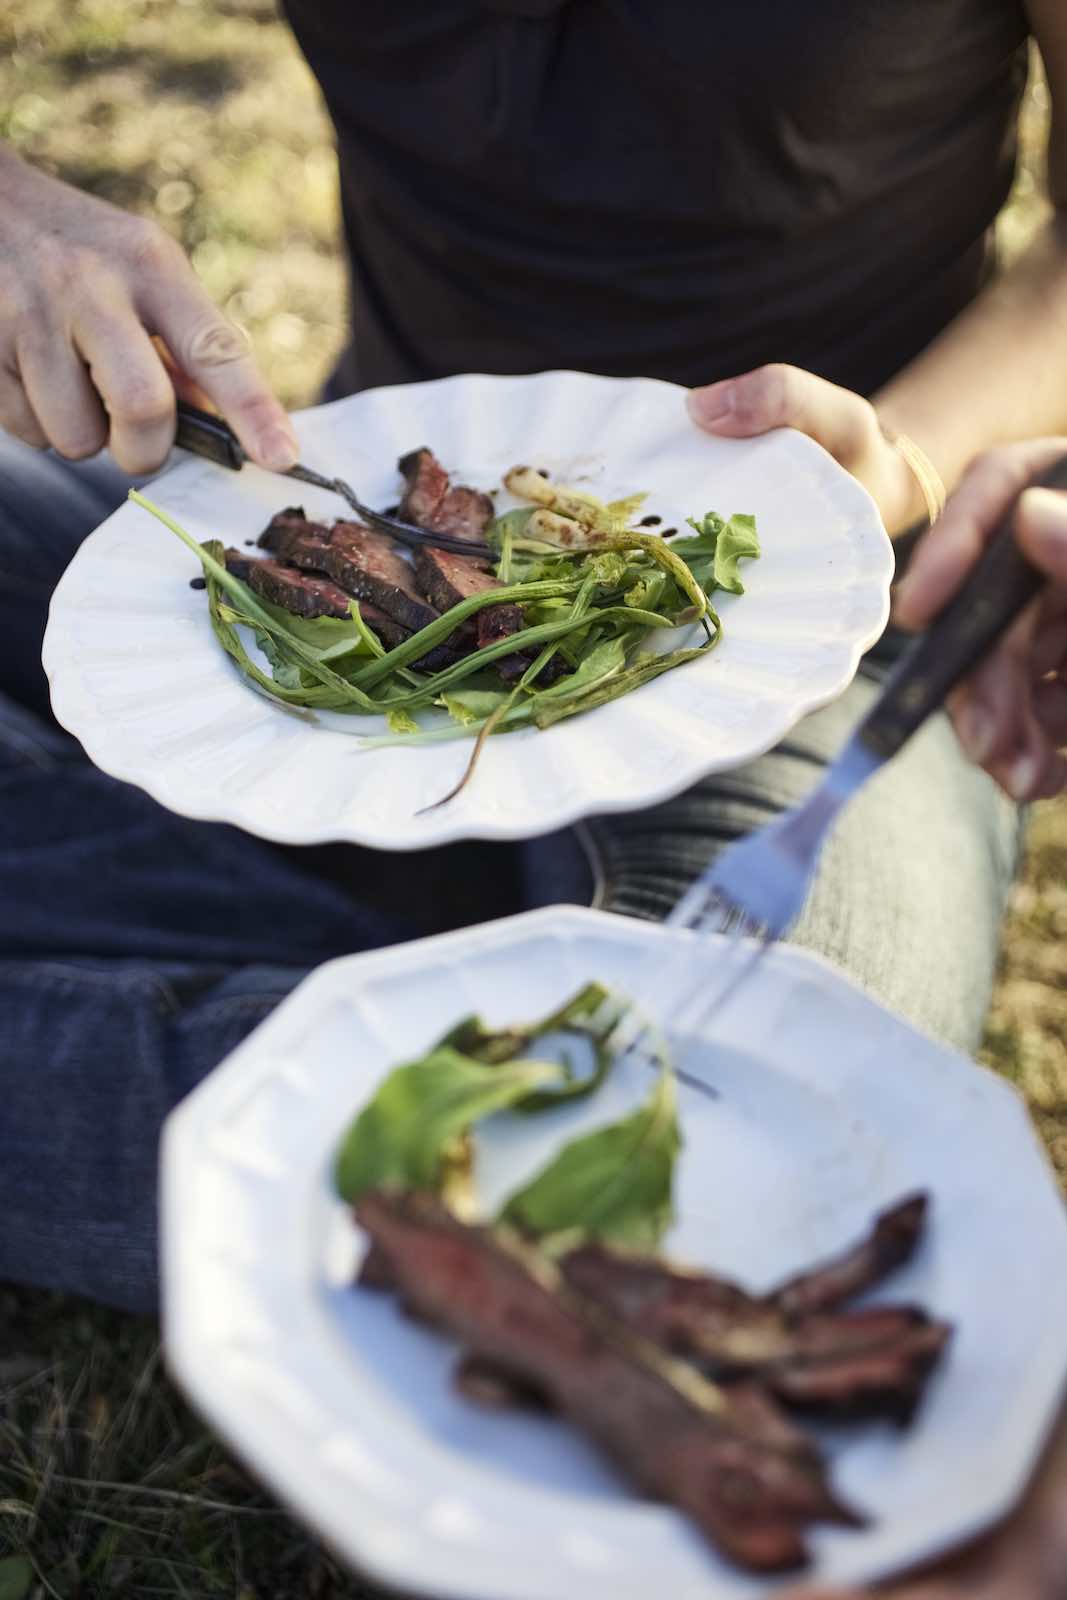 Jody Horton Photography - Cooked meat and greens enjoyed on white plates.